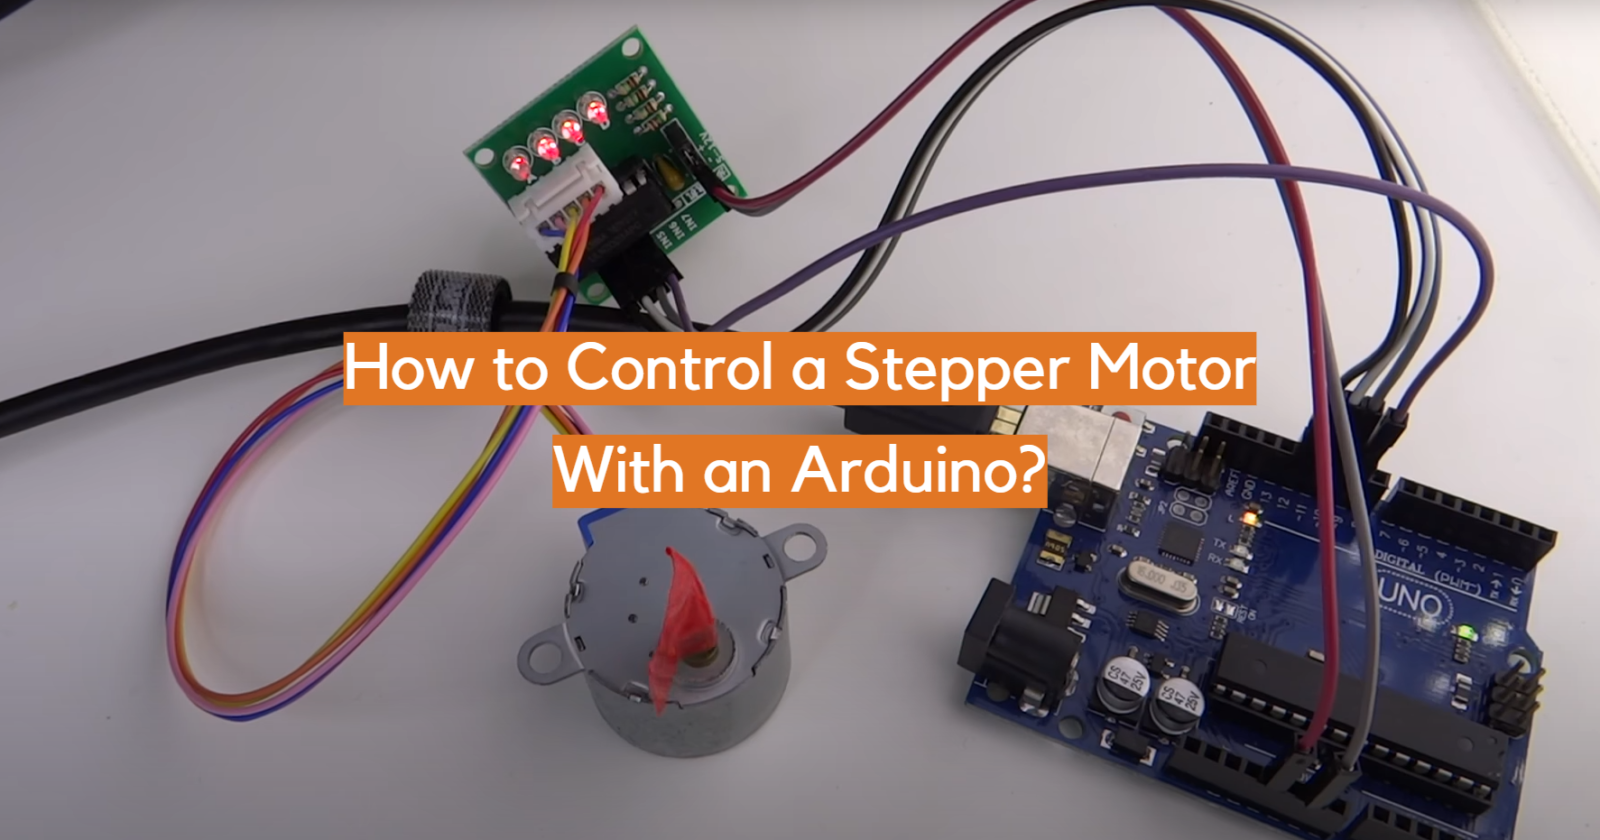 How to Control a Stepper Motor With an Arduino?